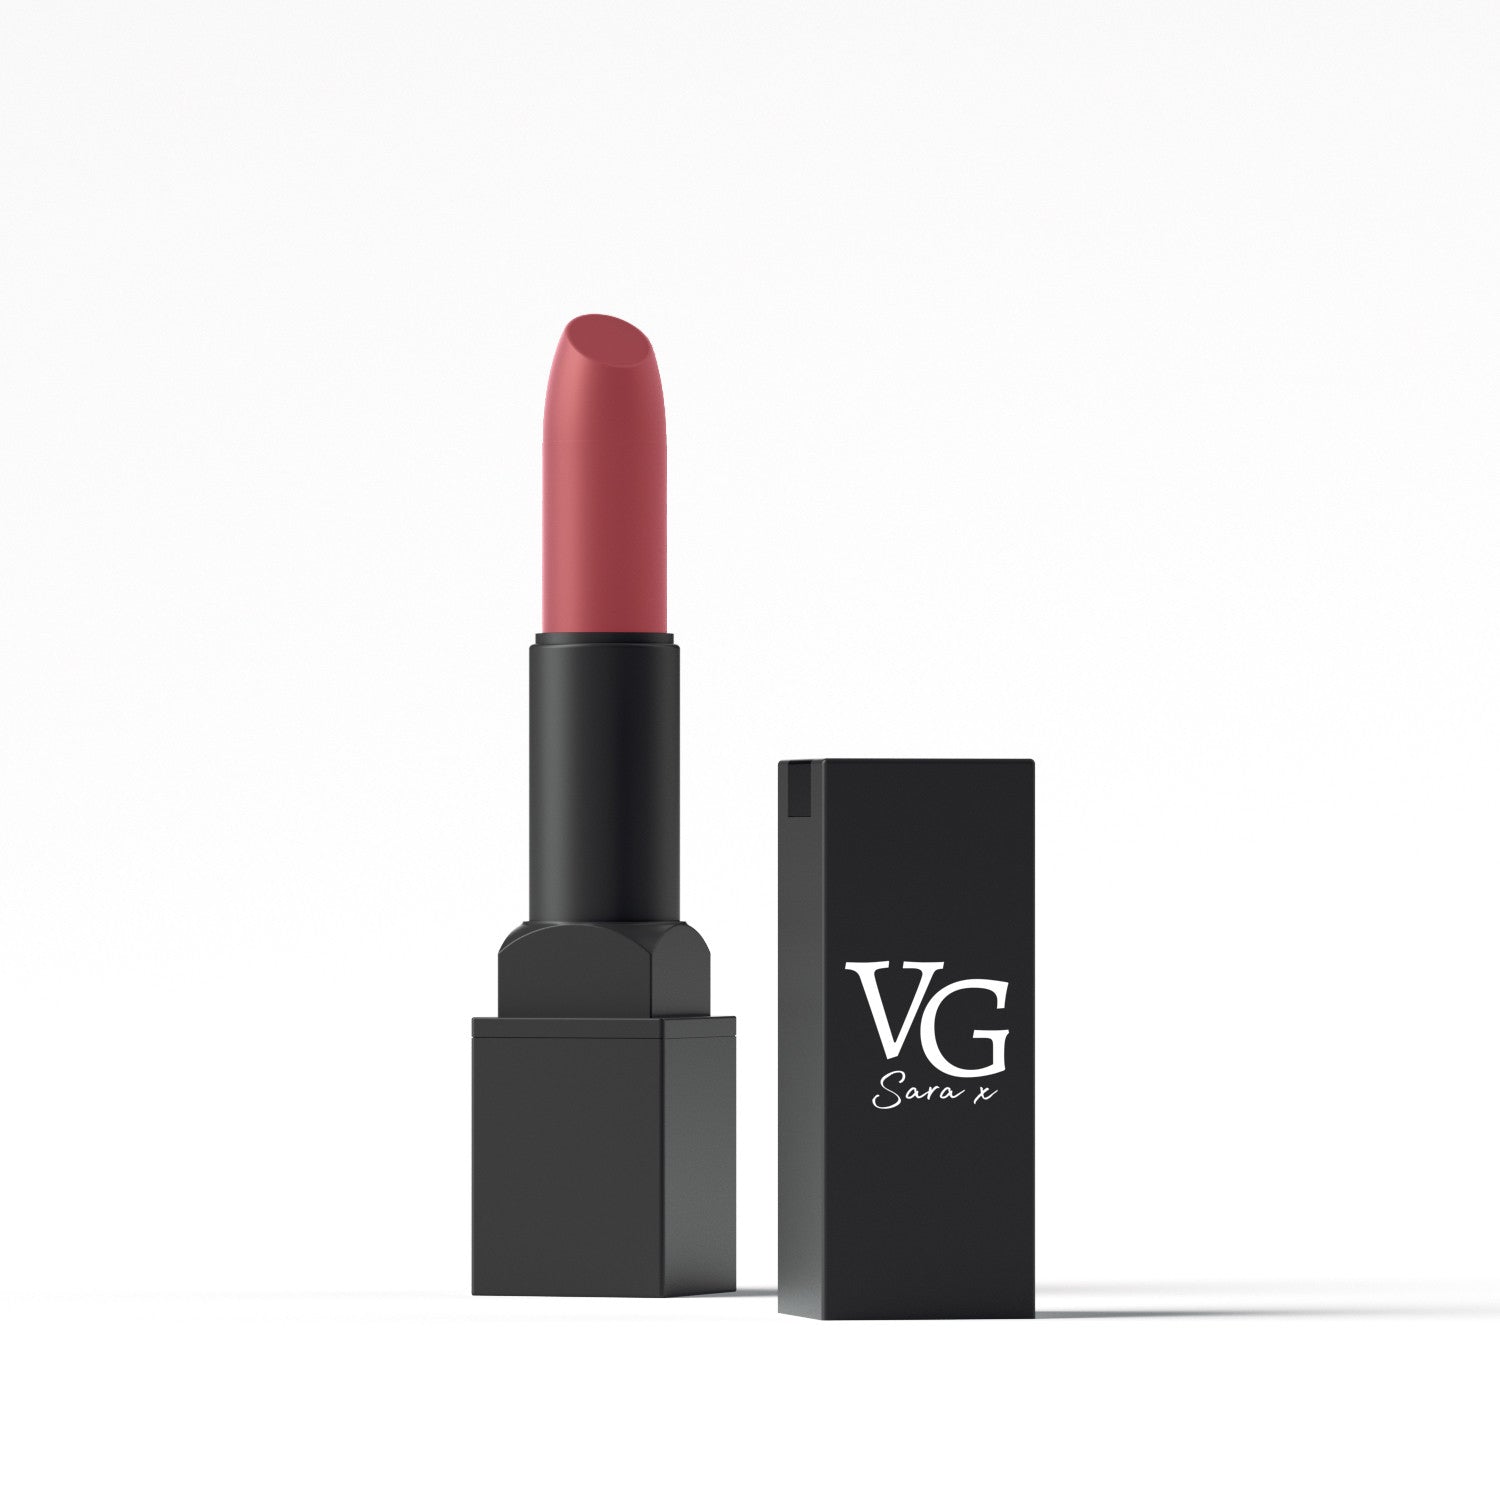 Detailed view of VG lipstick's texture and color